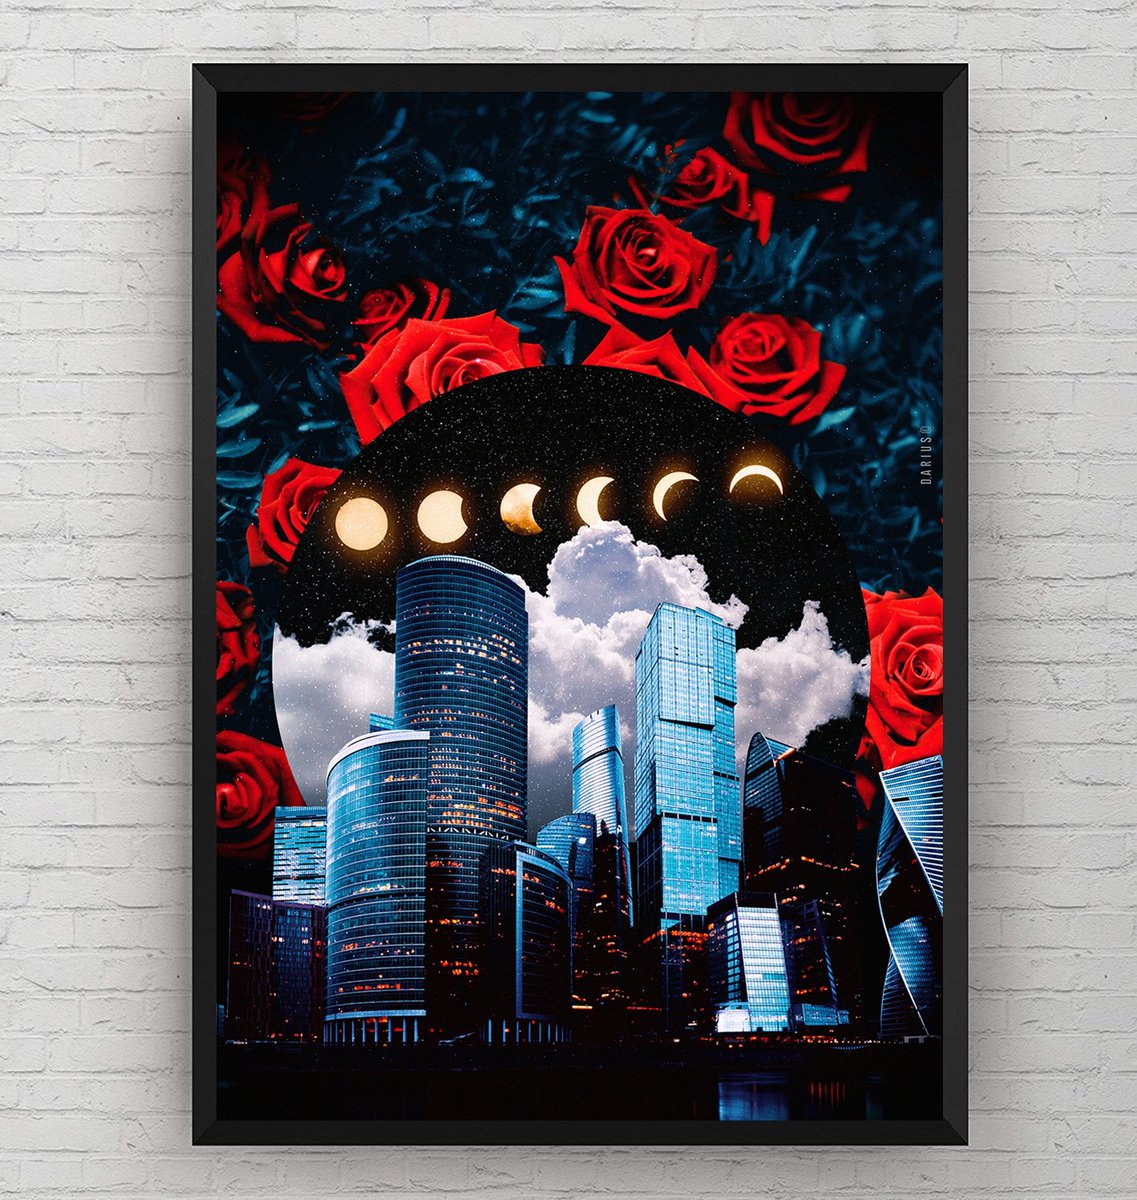 Landscapes & Roses - Limited Edition by Darius Comi